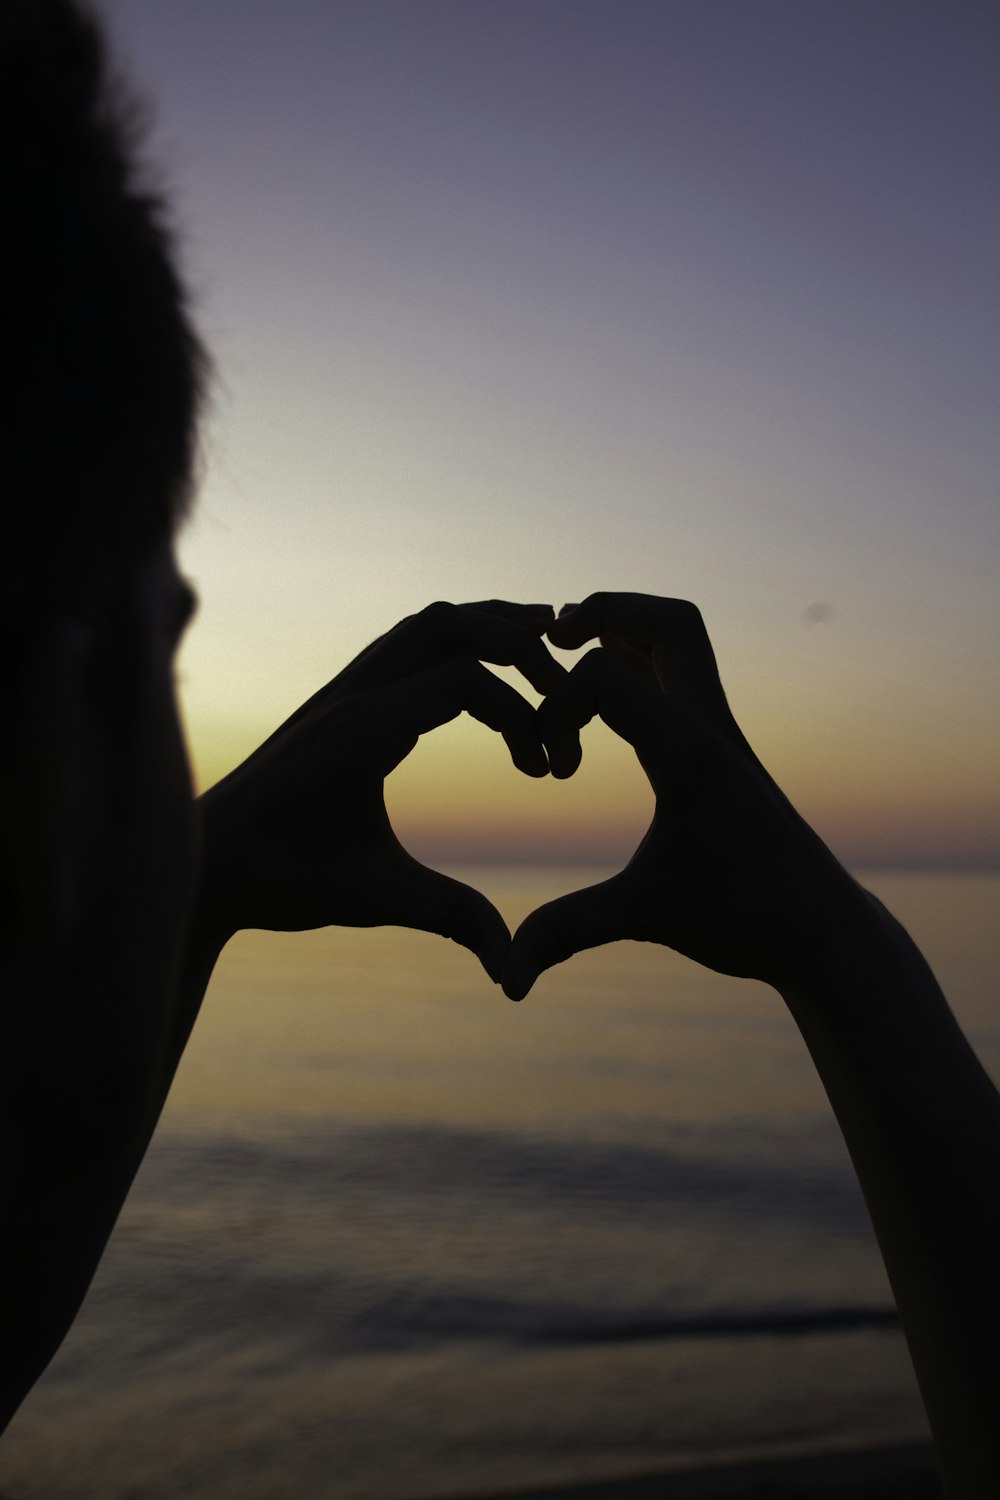 silhouette of person doing heart handsign